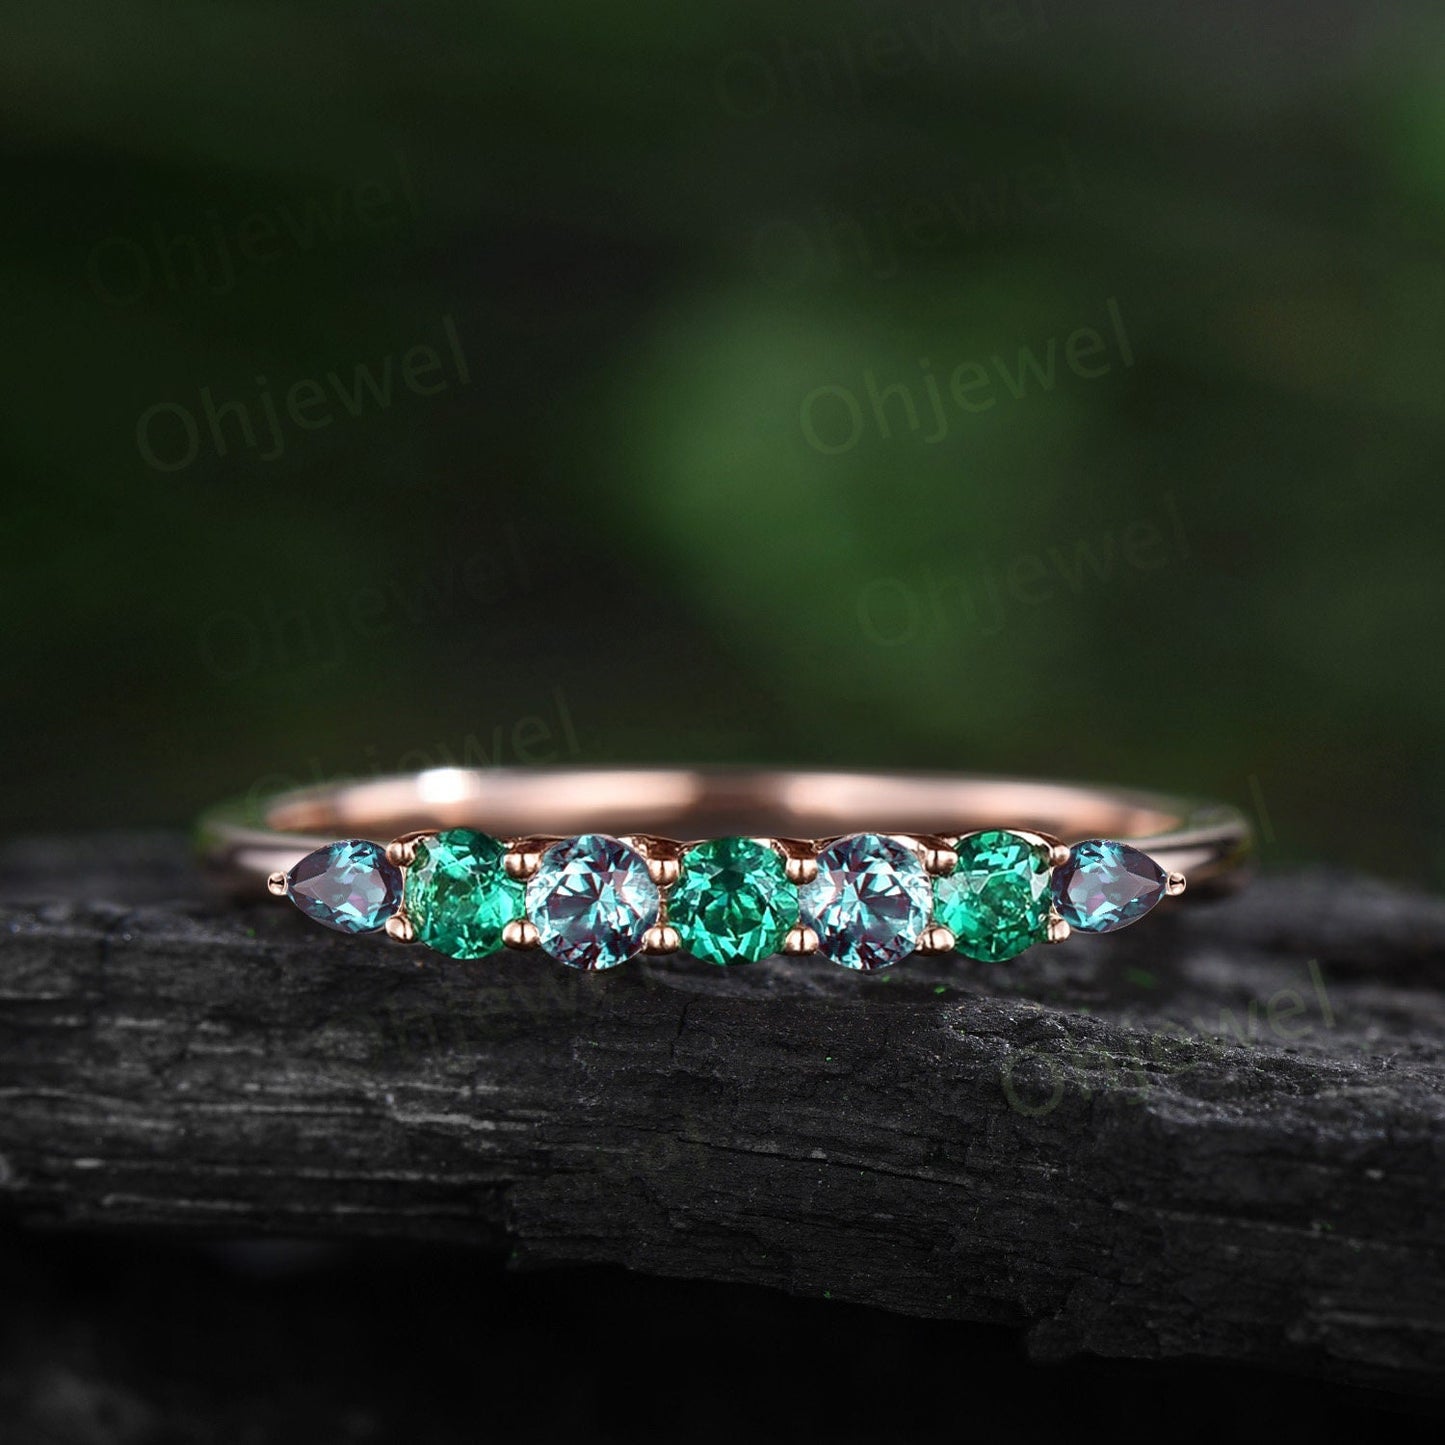 Round emerald alexandrite wedding band half eternity solid 14k rose gold Personalized green gemstone dainty unique anniversary ring gift